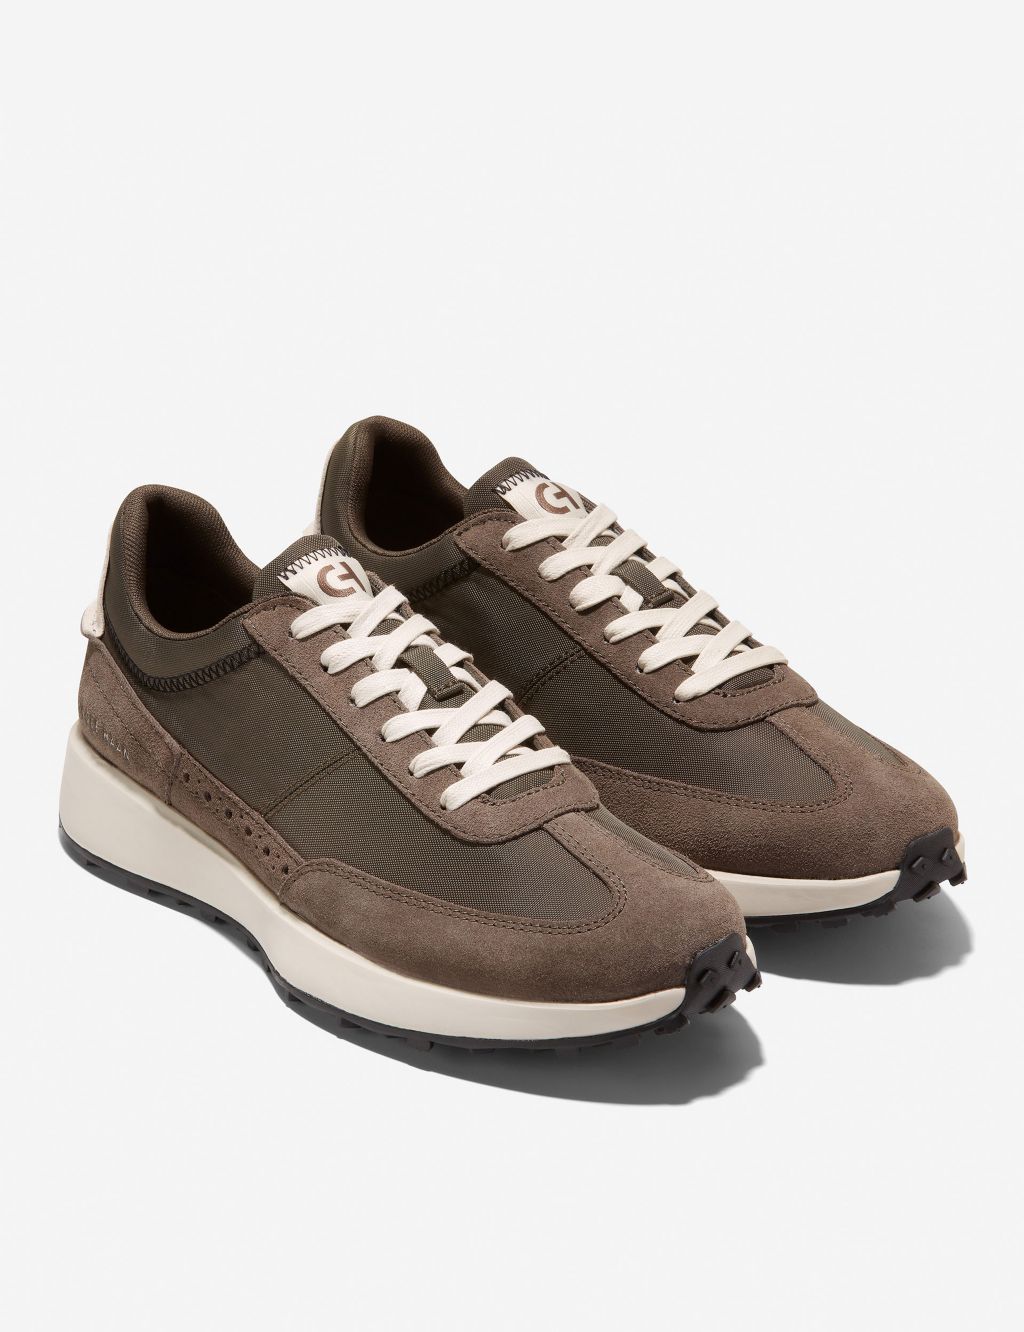 Grand Crosscourt Midtown Lace-Up Trainers image 2